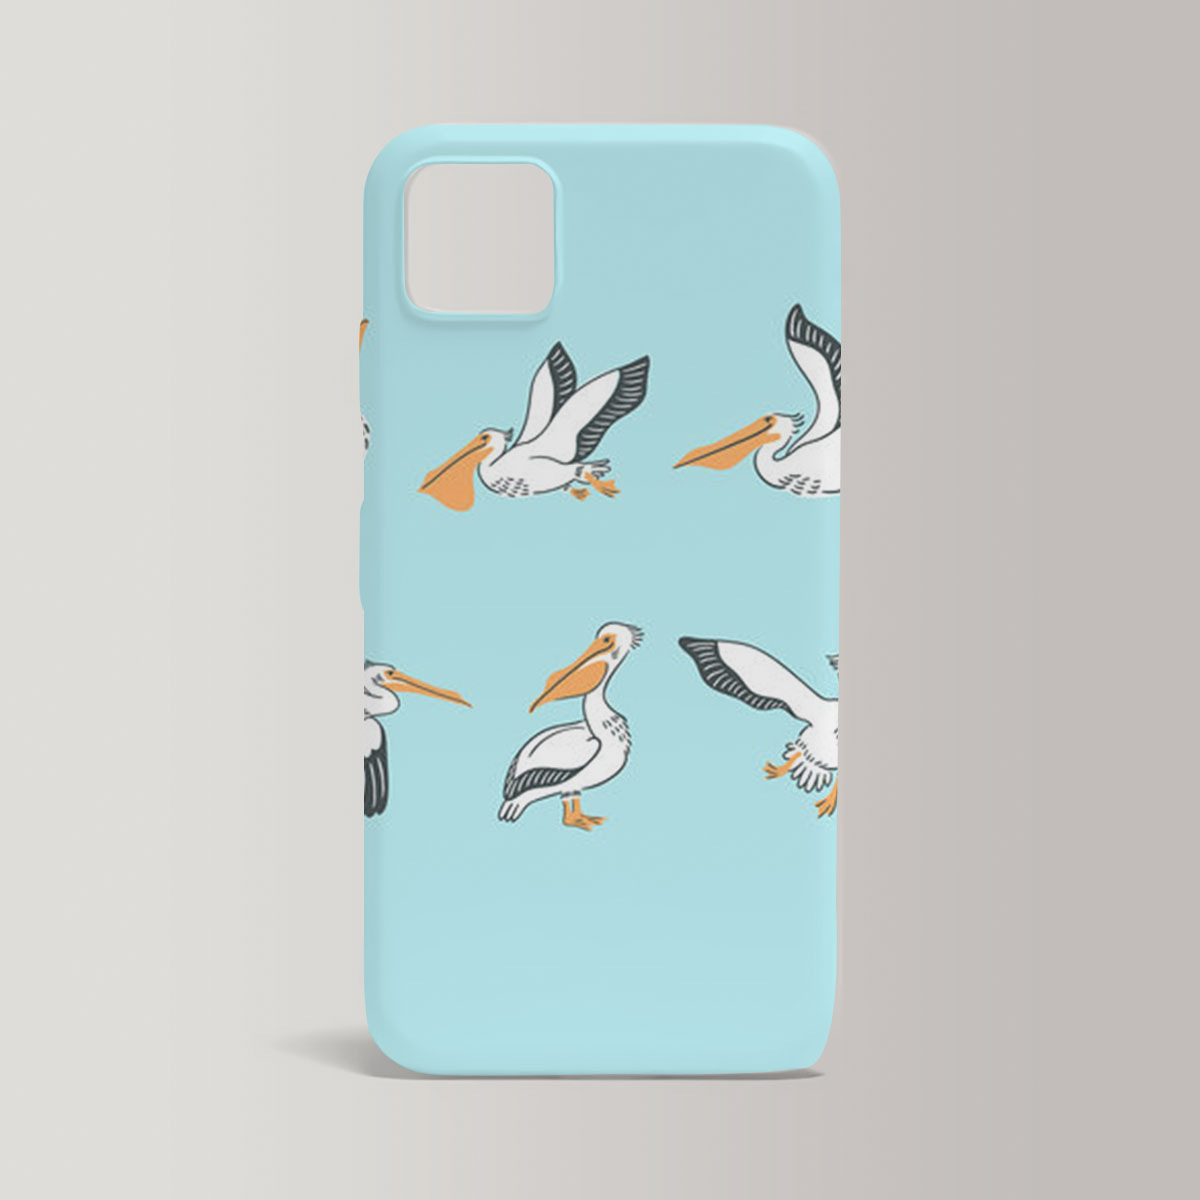 Positions Pelicans Coon Iphone Case